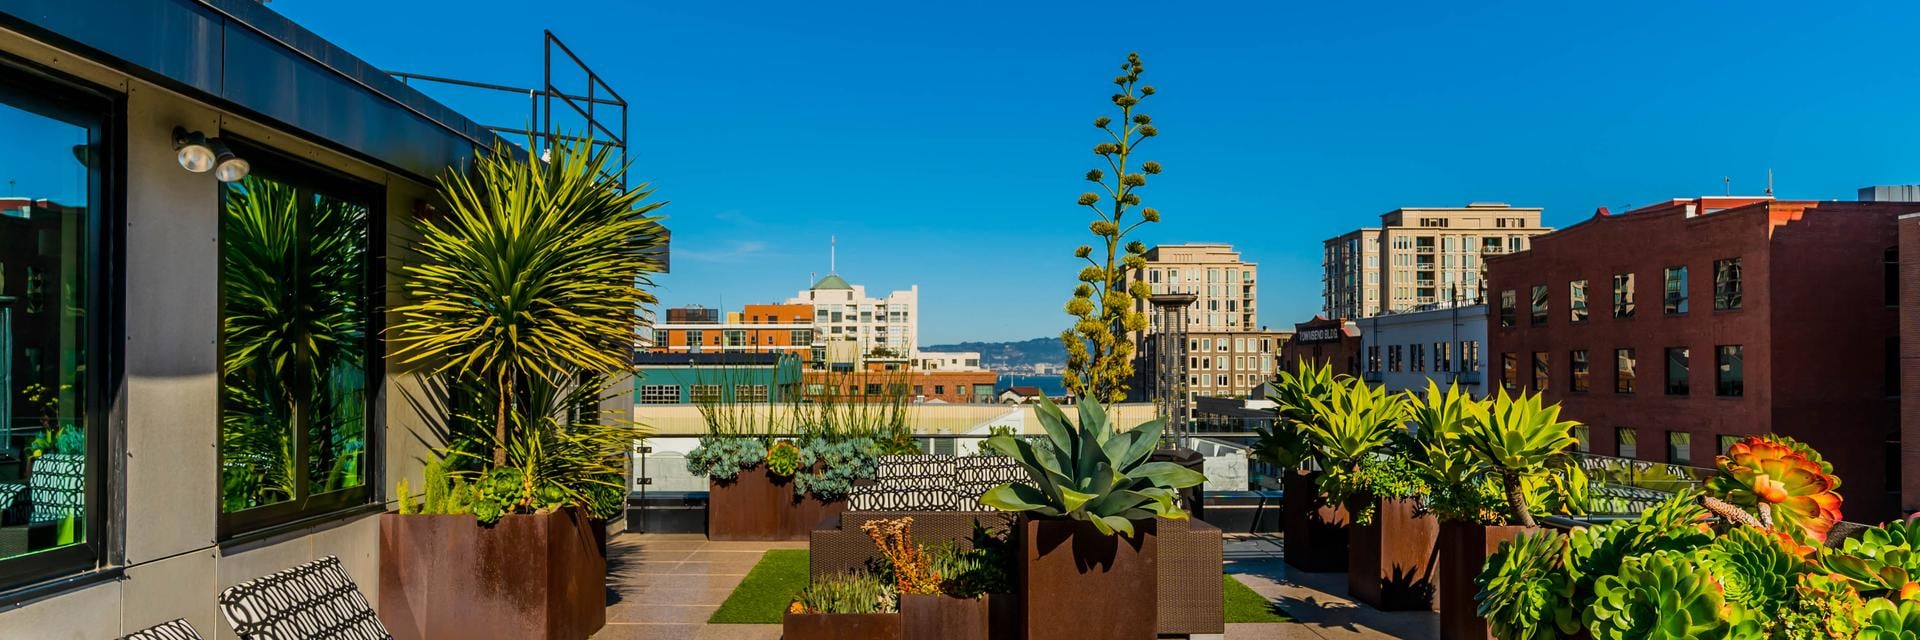 Apartments for Rent in South Park San Francisco - Rooftop Deck Showcasing a Wonderful Succulent Garden Featuring Various Lounging Areas and Views Overlooking the City